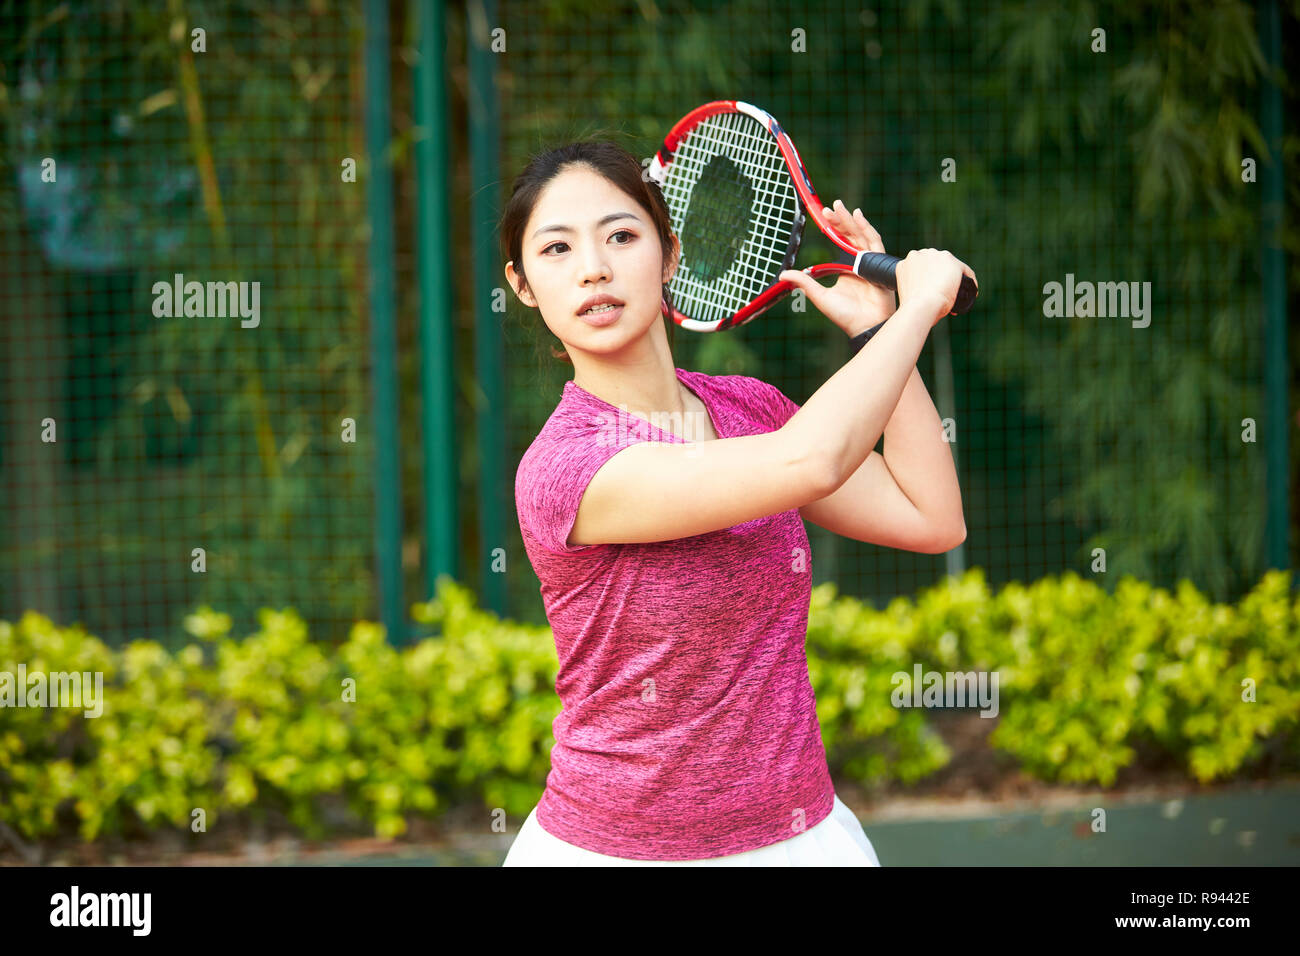 Young Asian woman tennis player hitting ball avec forehand Banque D'Images